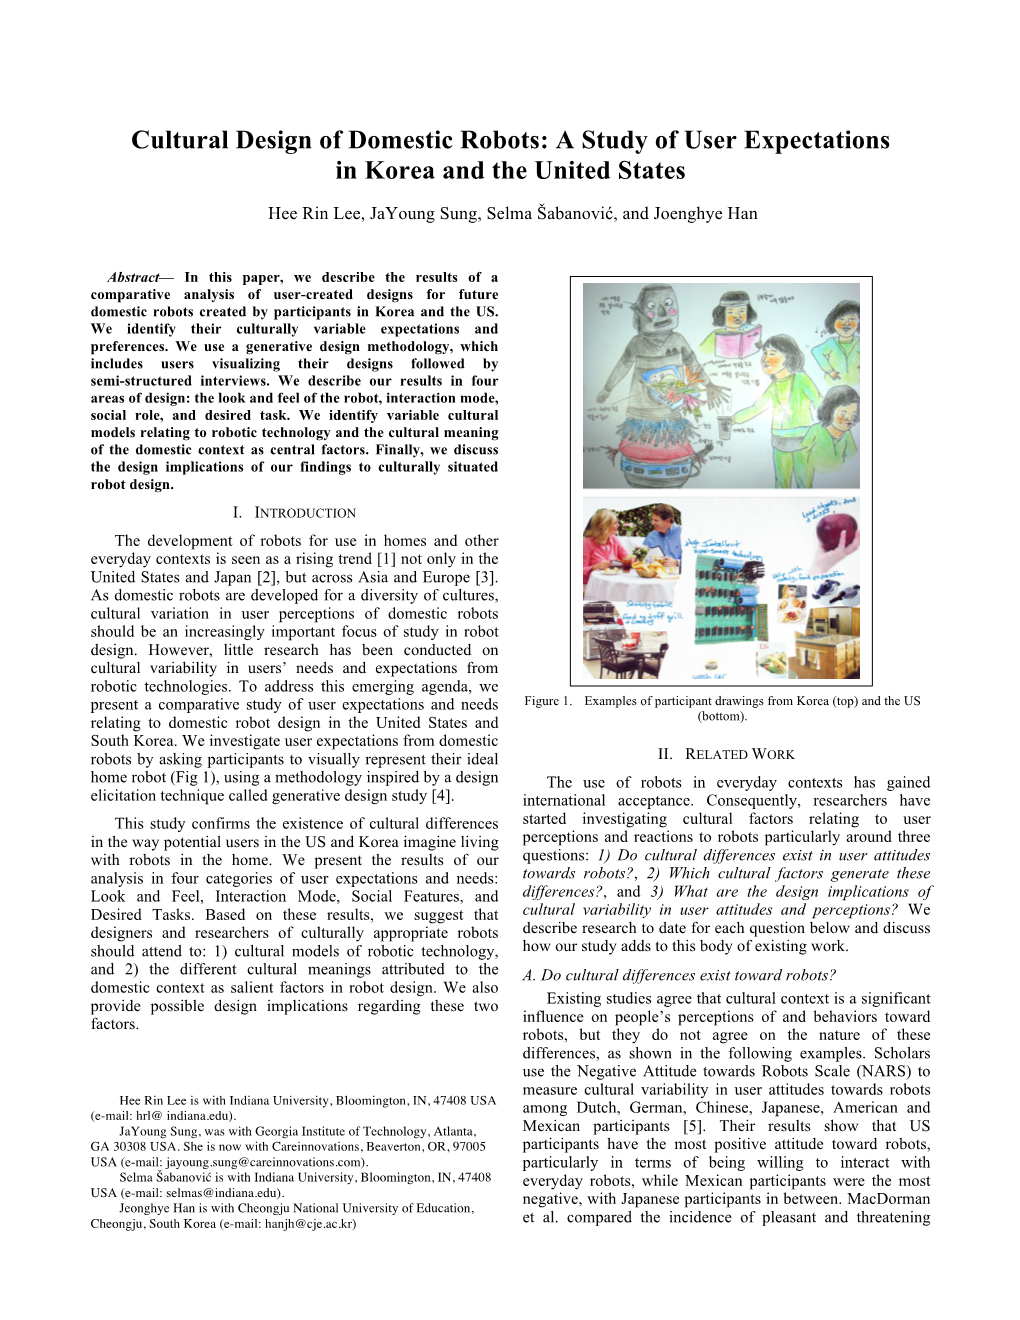 Cultural Design of Domestic Robots: a Study of User Expectations in Korea and the United States